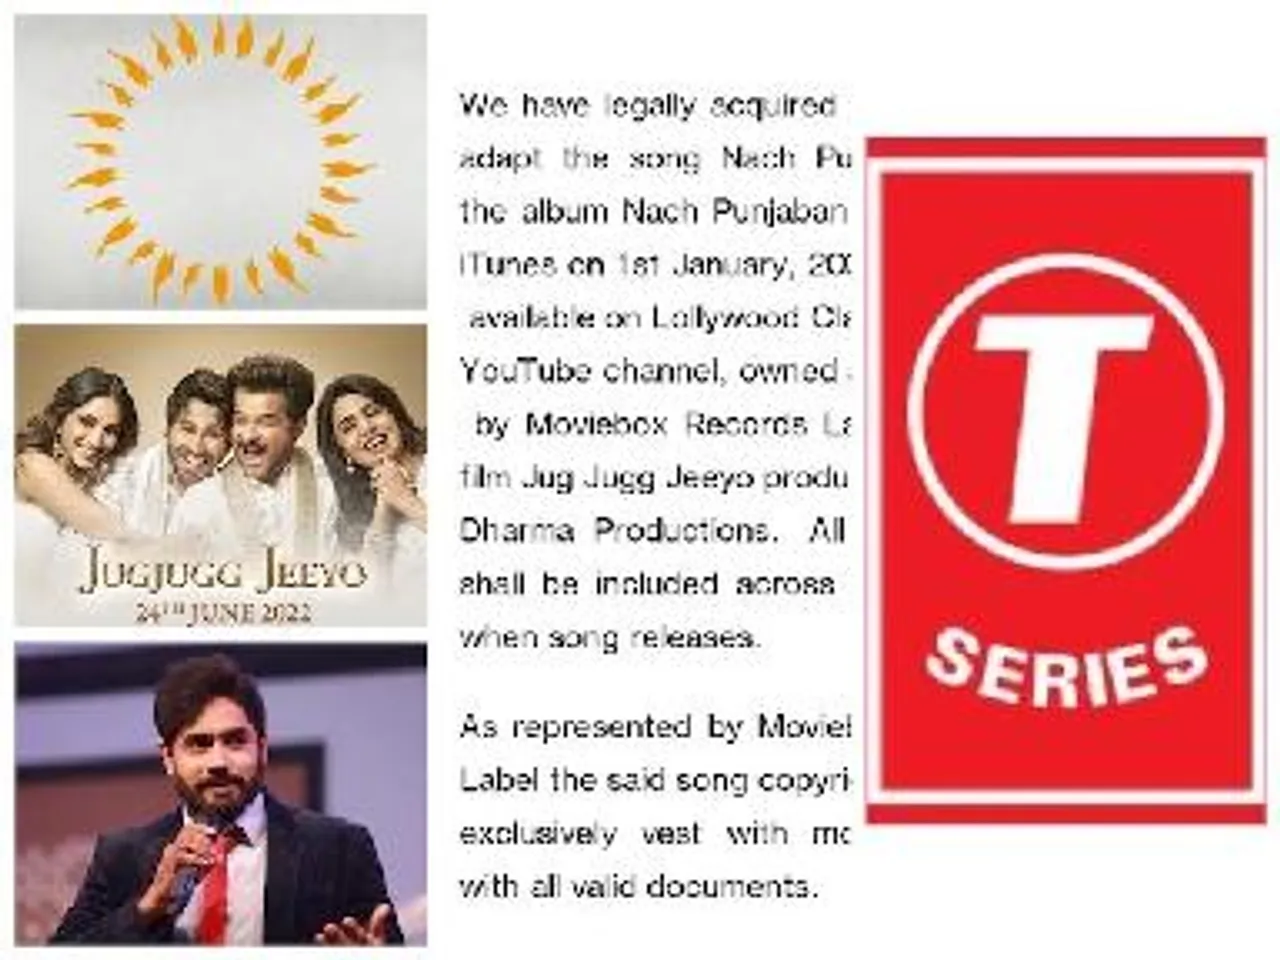 T Series Issues A Statement Over Nach Punjaban Song Controversy